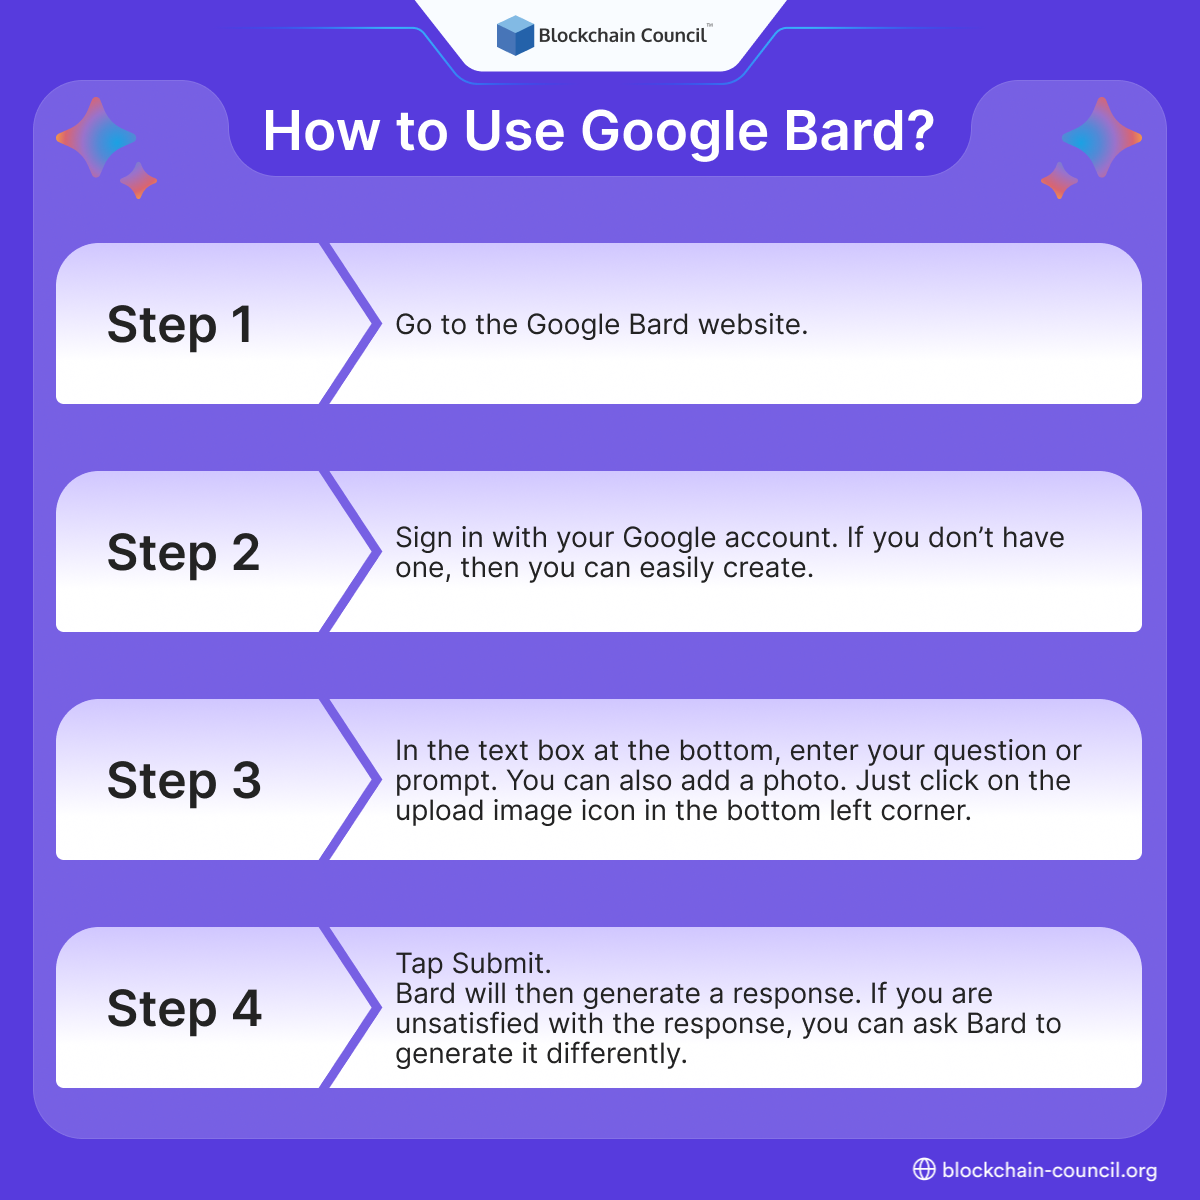 How to Use Google Bard?